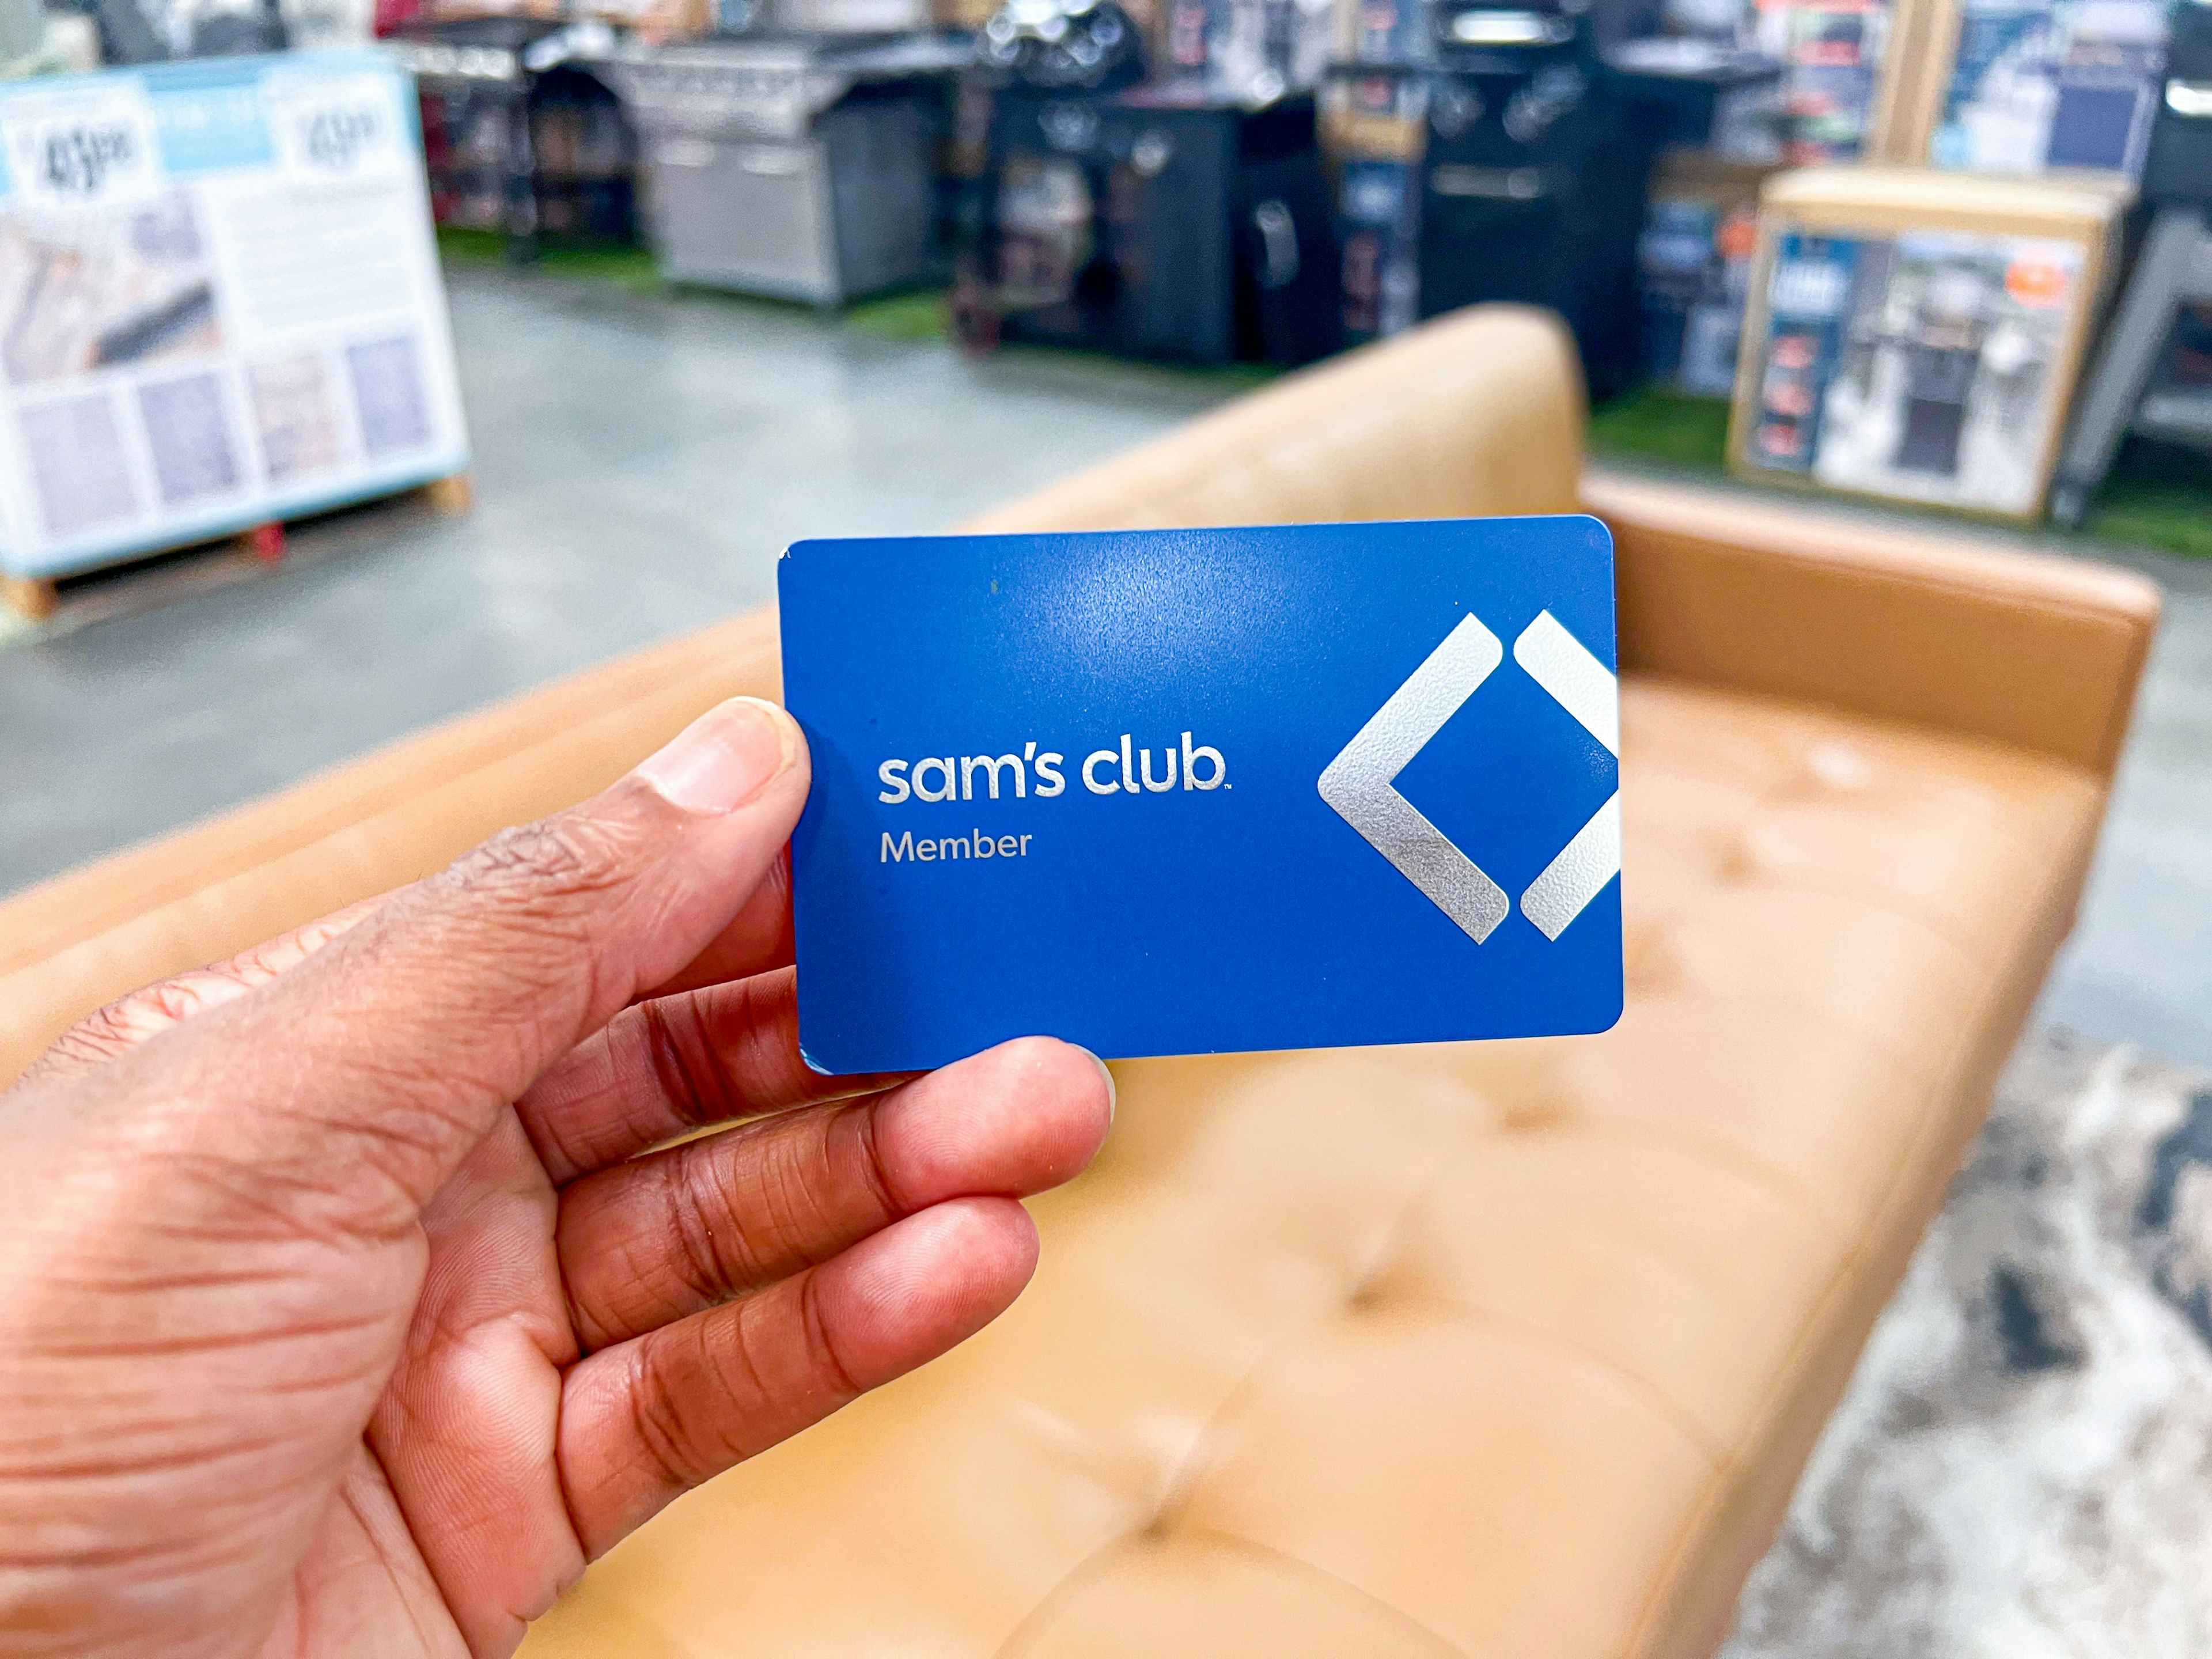 Hand holding a Sam's Club Card in front of Furniture